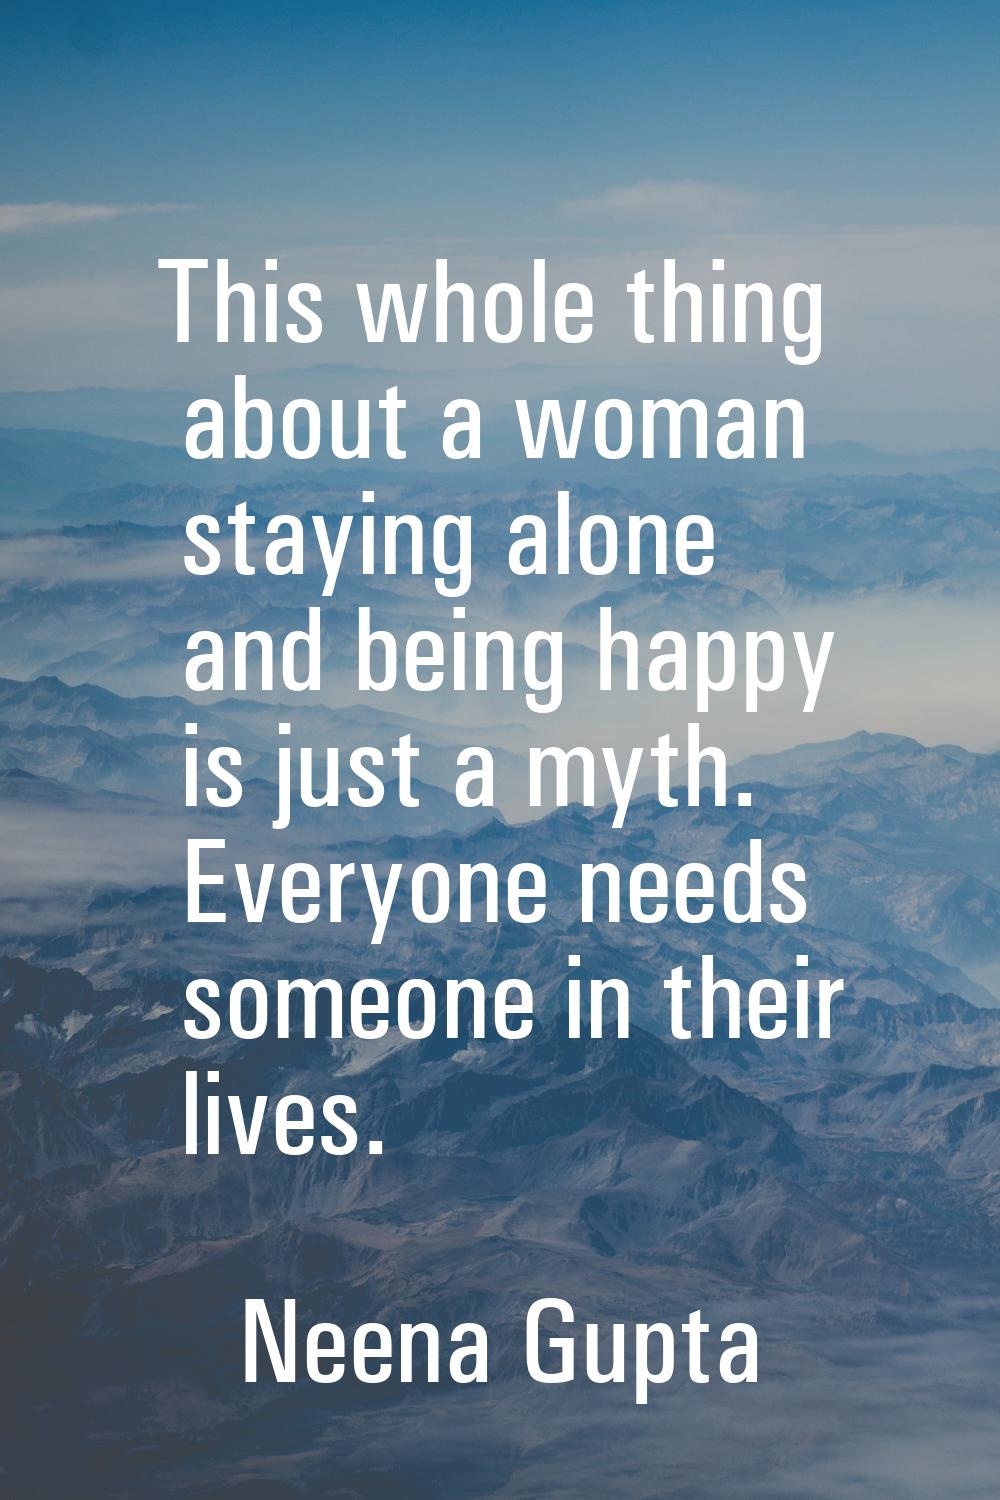 This whole thing about a woman staying alone and being happy is just a myth. Everyone needs someone